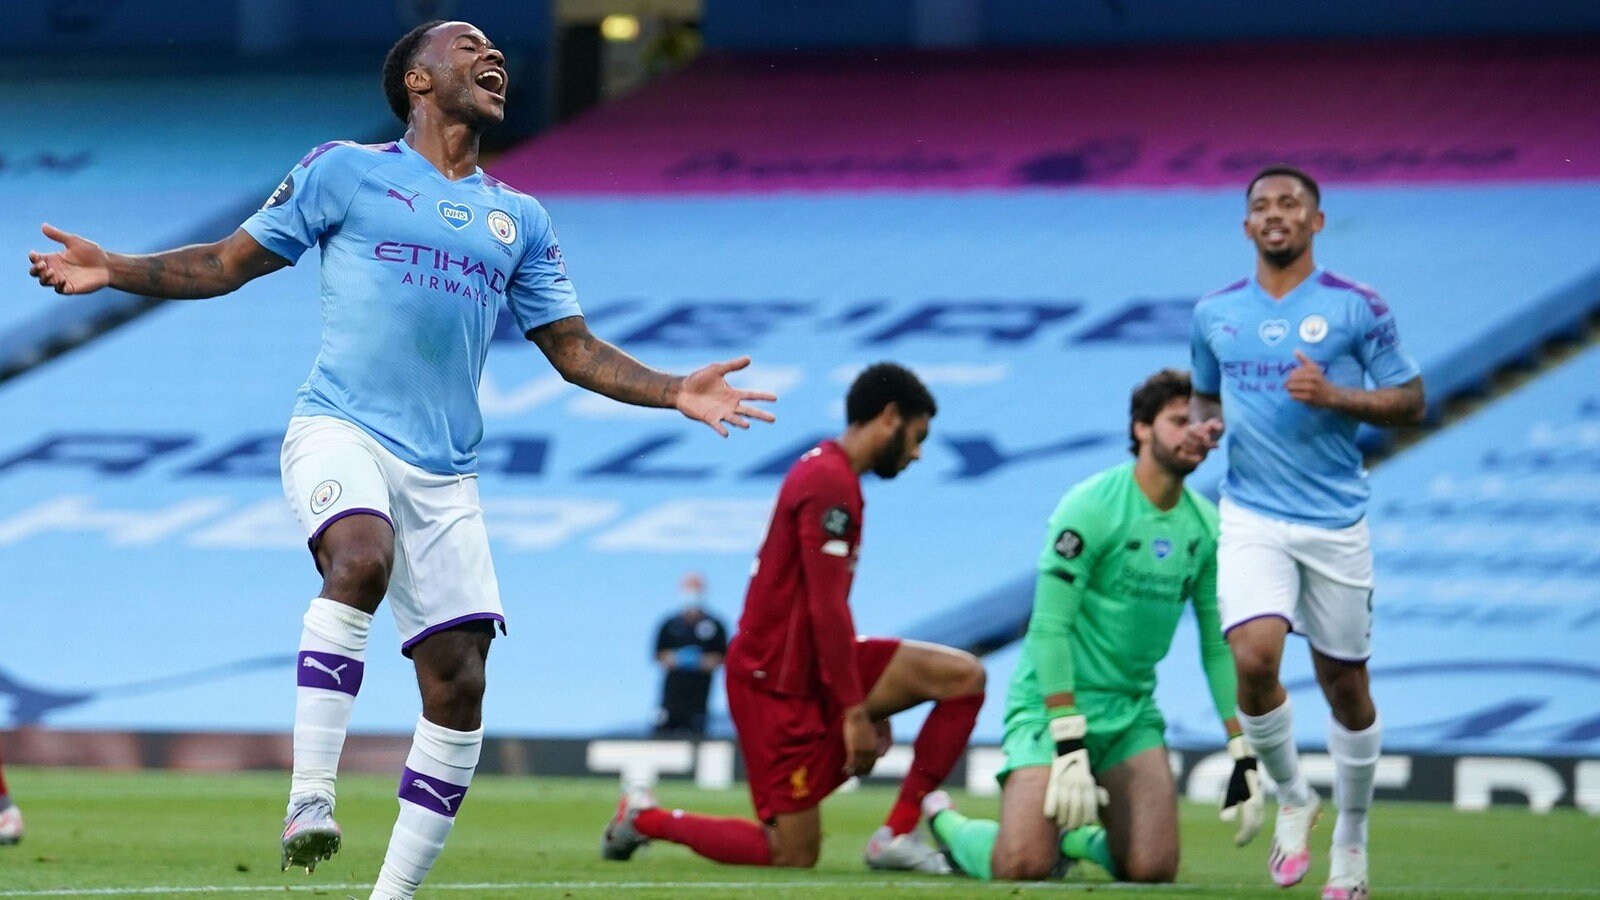 City beat the champions at home 4-0 in 32nd round